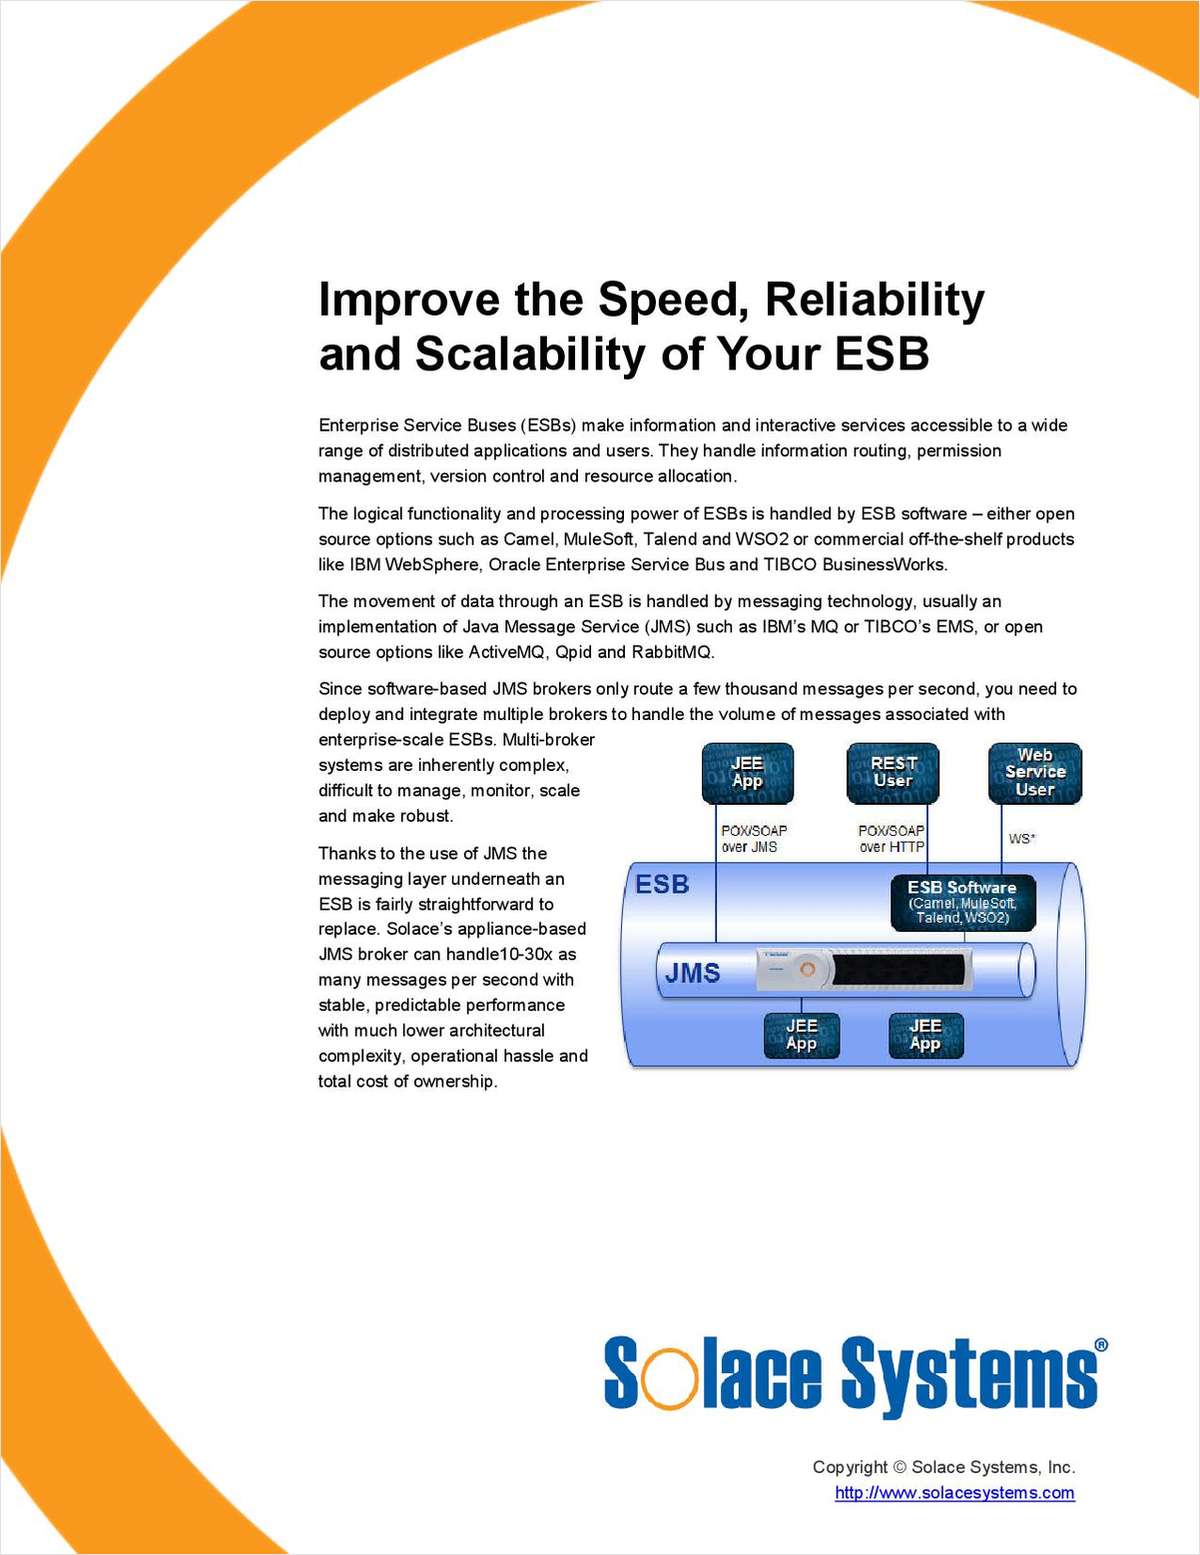 Improve the Speed, Reliability and Scalability of Your ESB